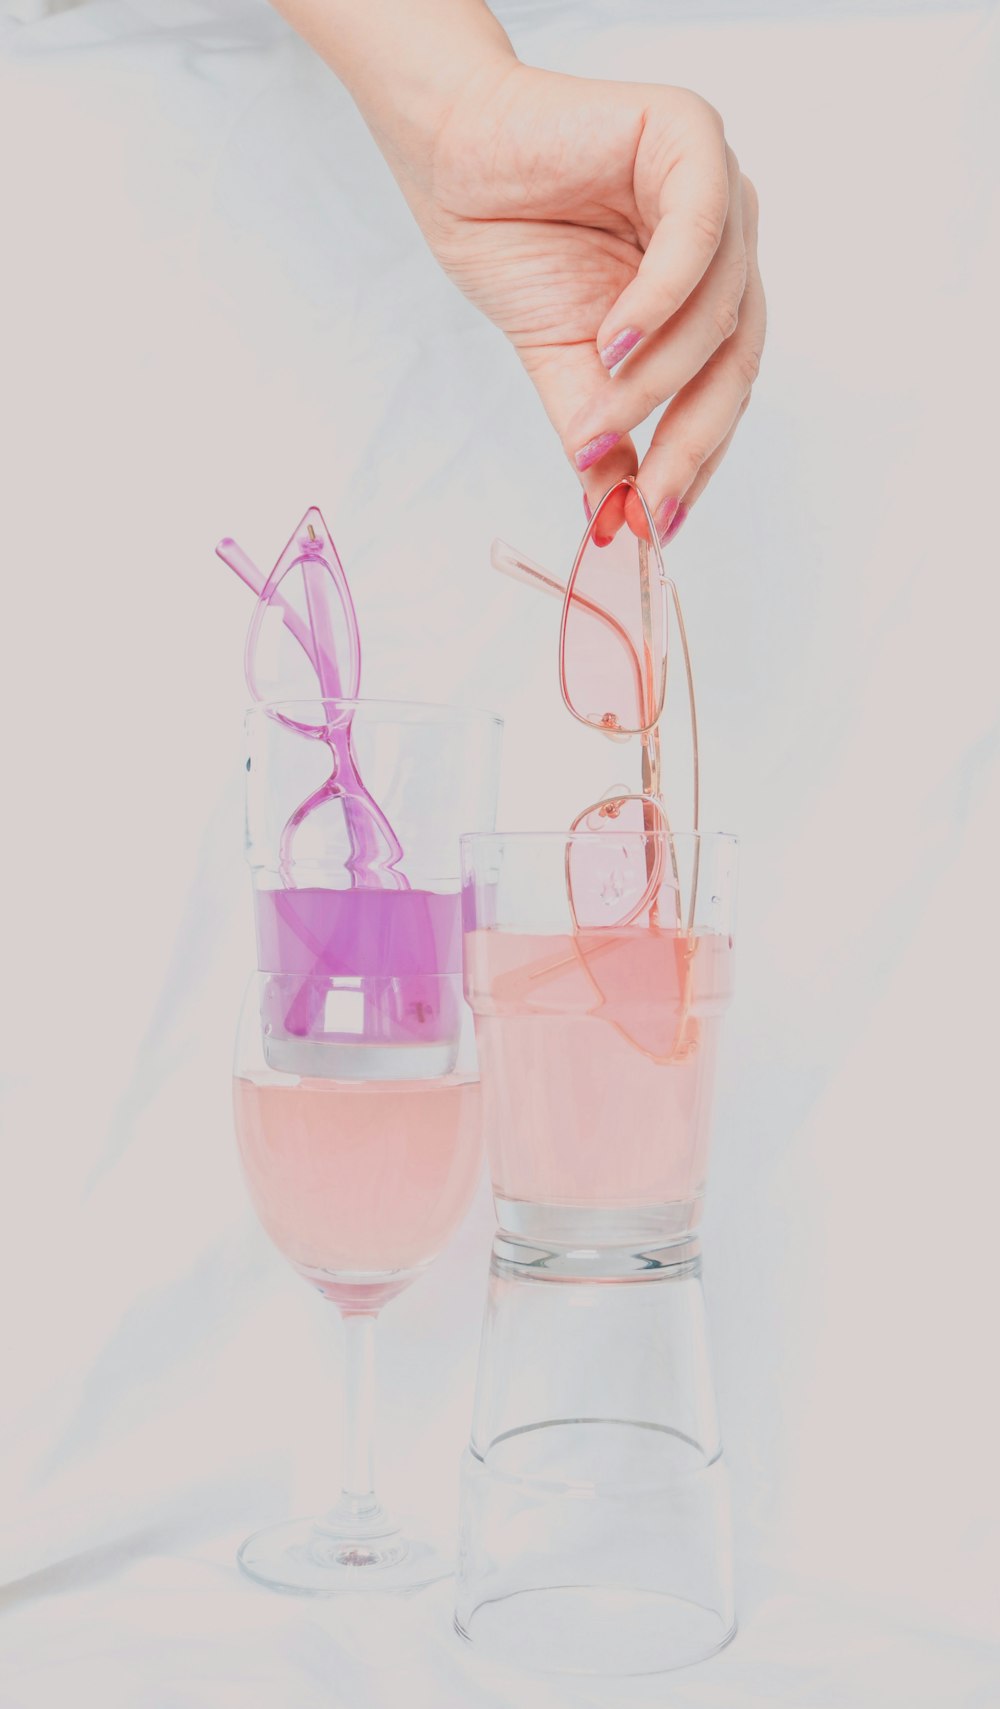 Download Person Holding Clear Drinking Glass With Pink Liquid Photo Free Glass Image On Unsplash Yellowimages Mockups